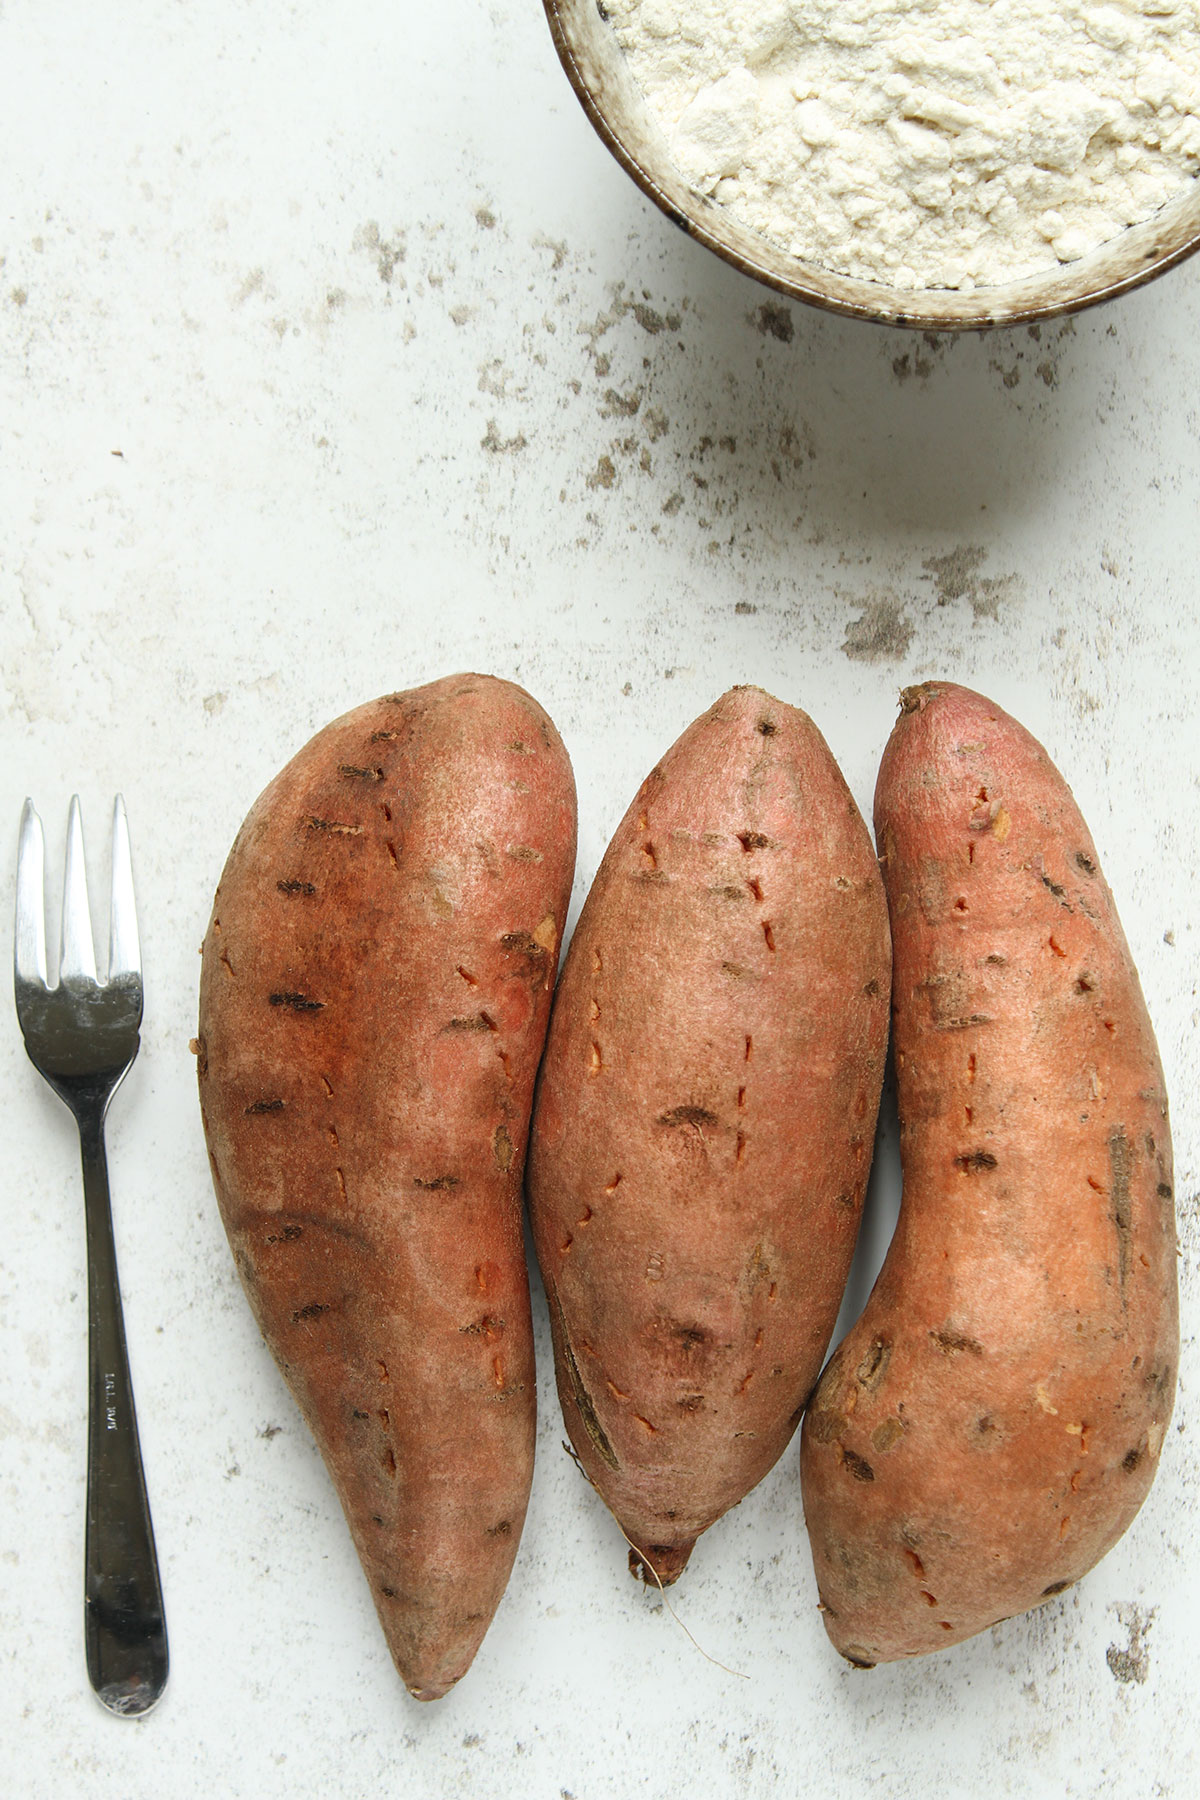 The sweet potatoes ready for cooking and a bowl of flour.